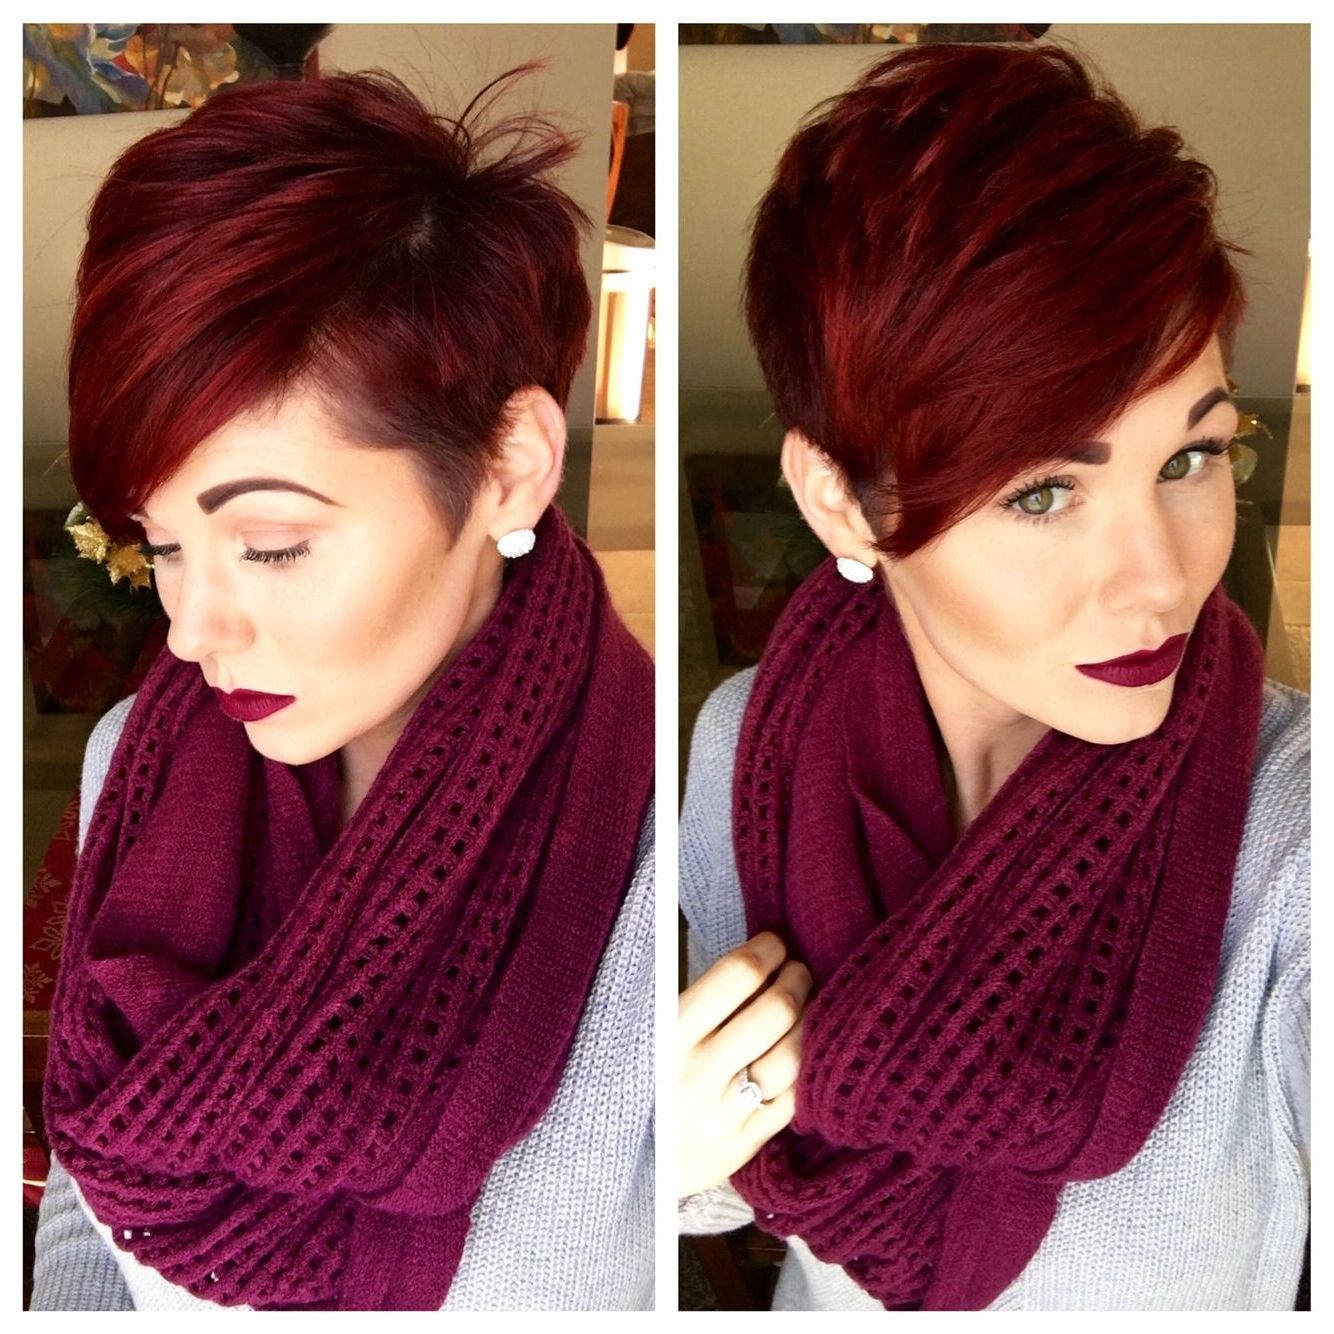 Pixie Cut And Red Violet Hair | Hairstyles/inspiration | Pinterest With Most Current Shaggy Pixie Haircuts In Red Hues (Photo 3 of 15)